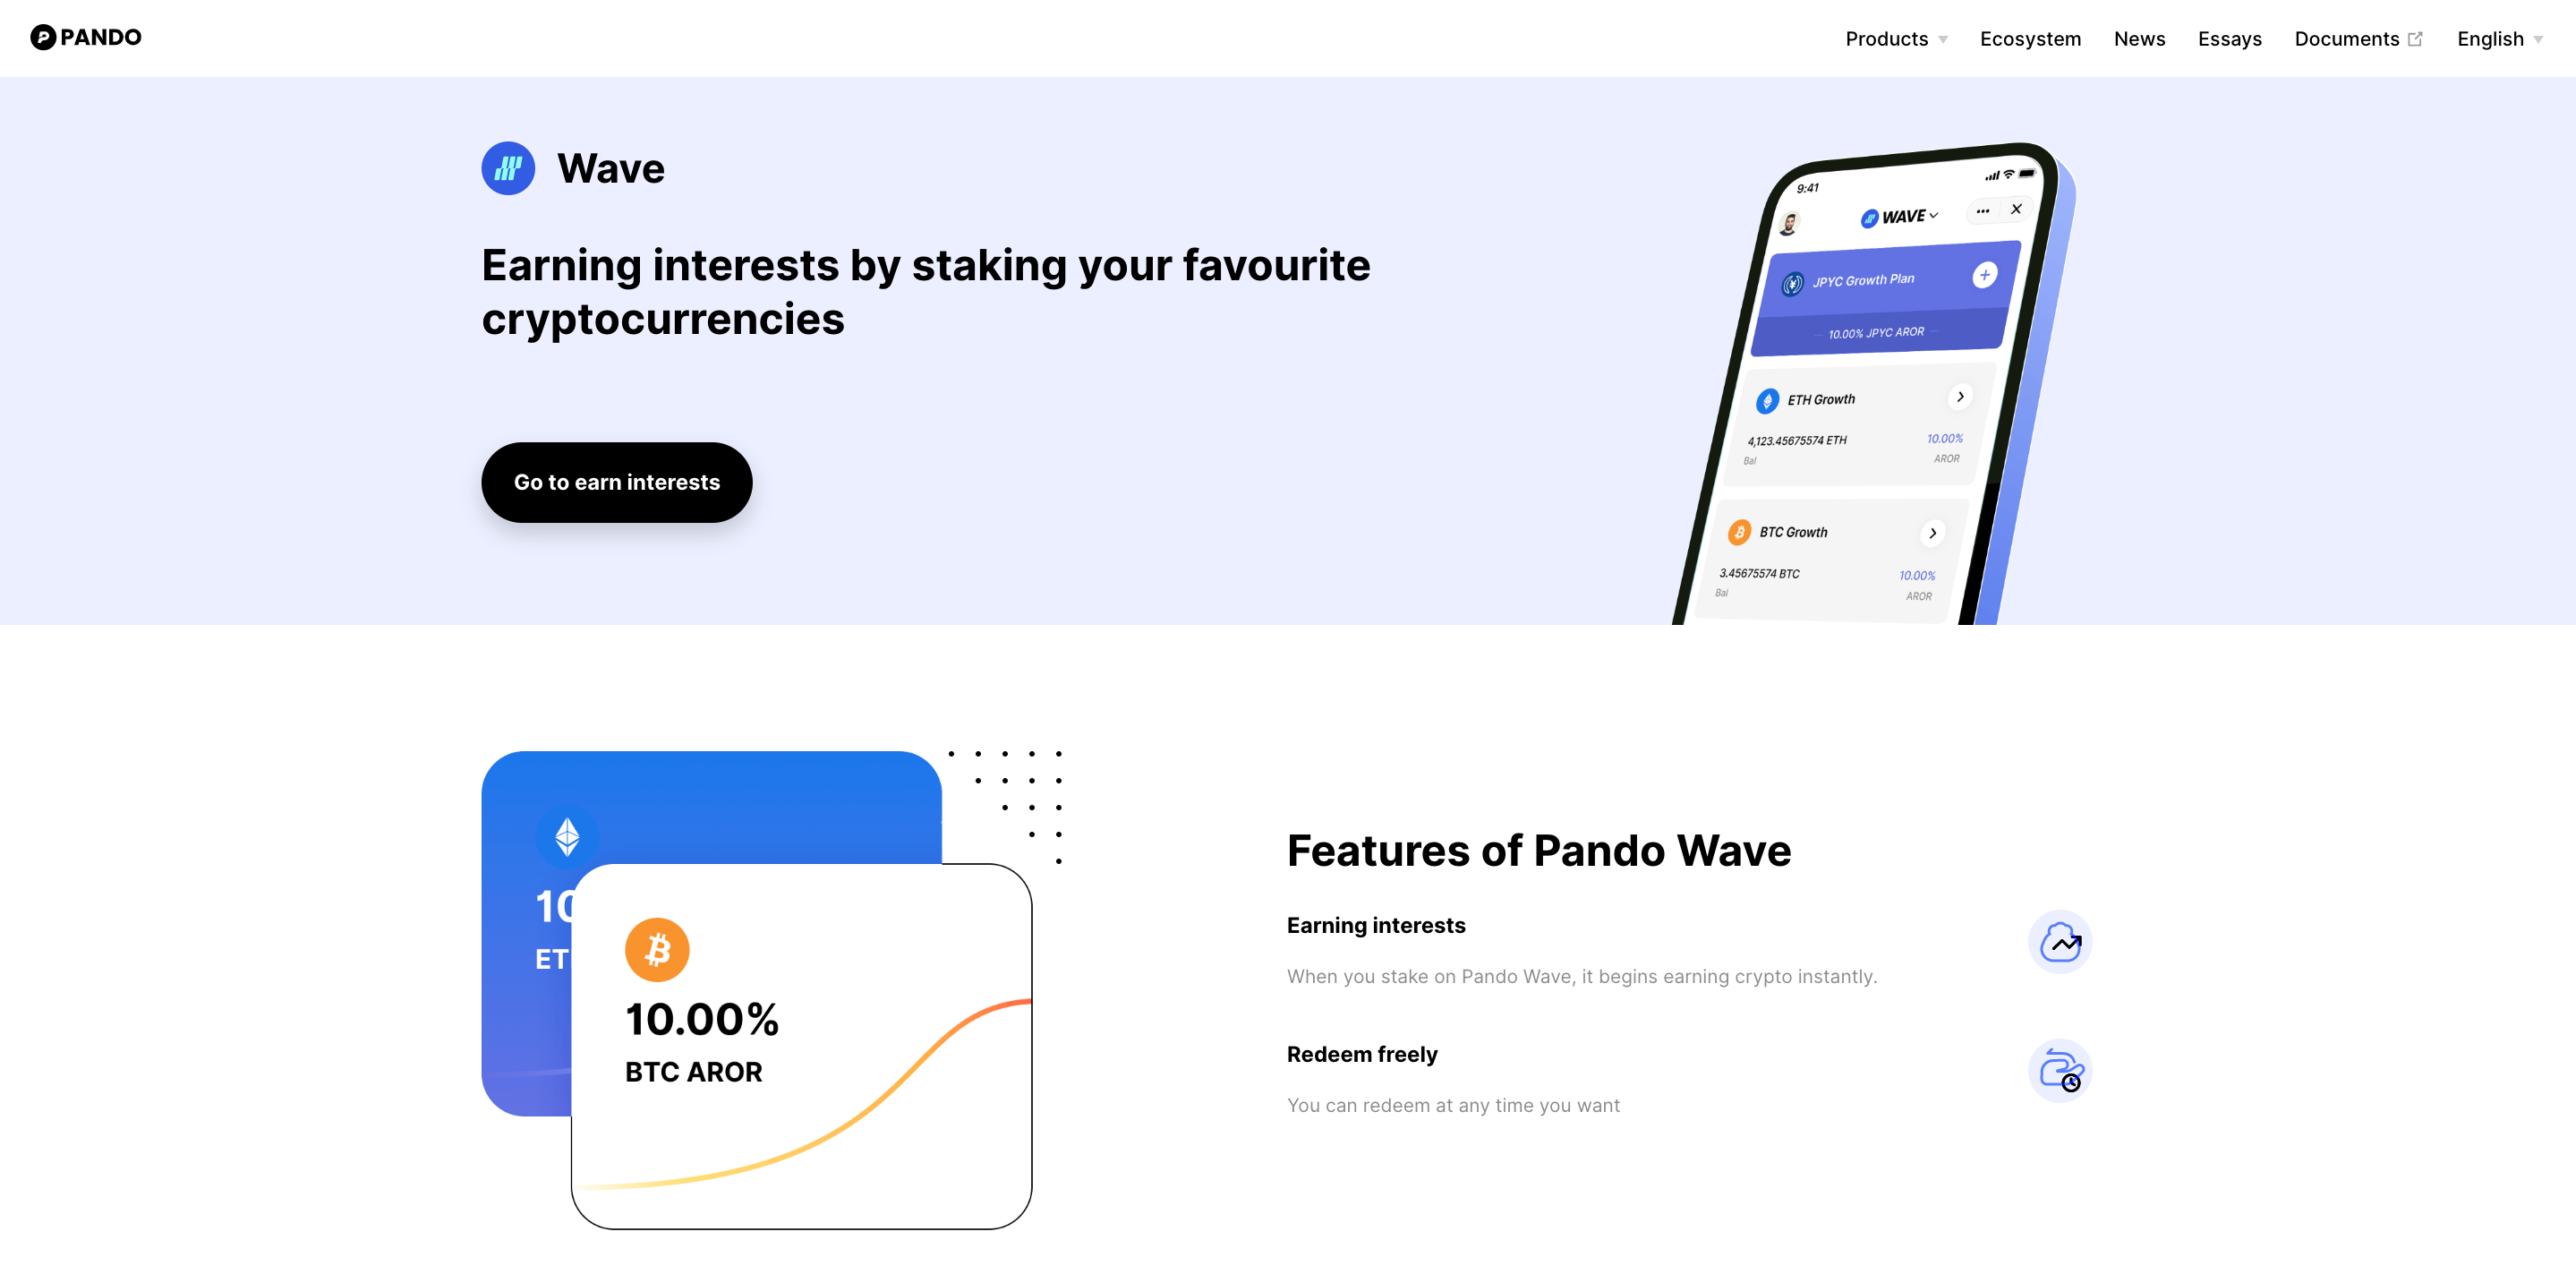 Wave Product Page